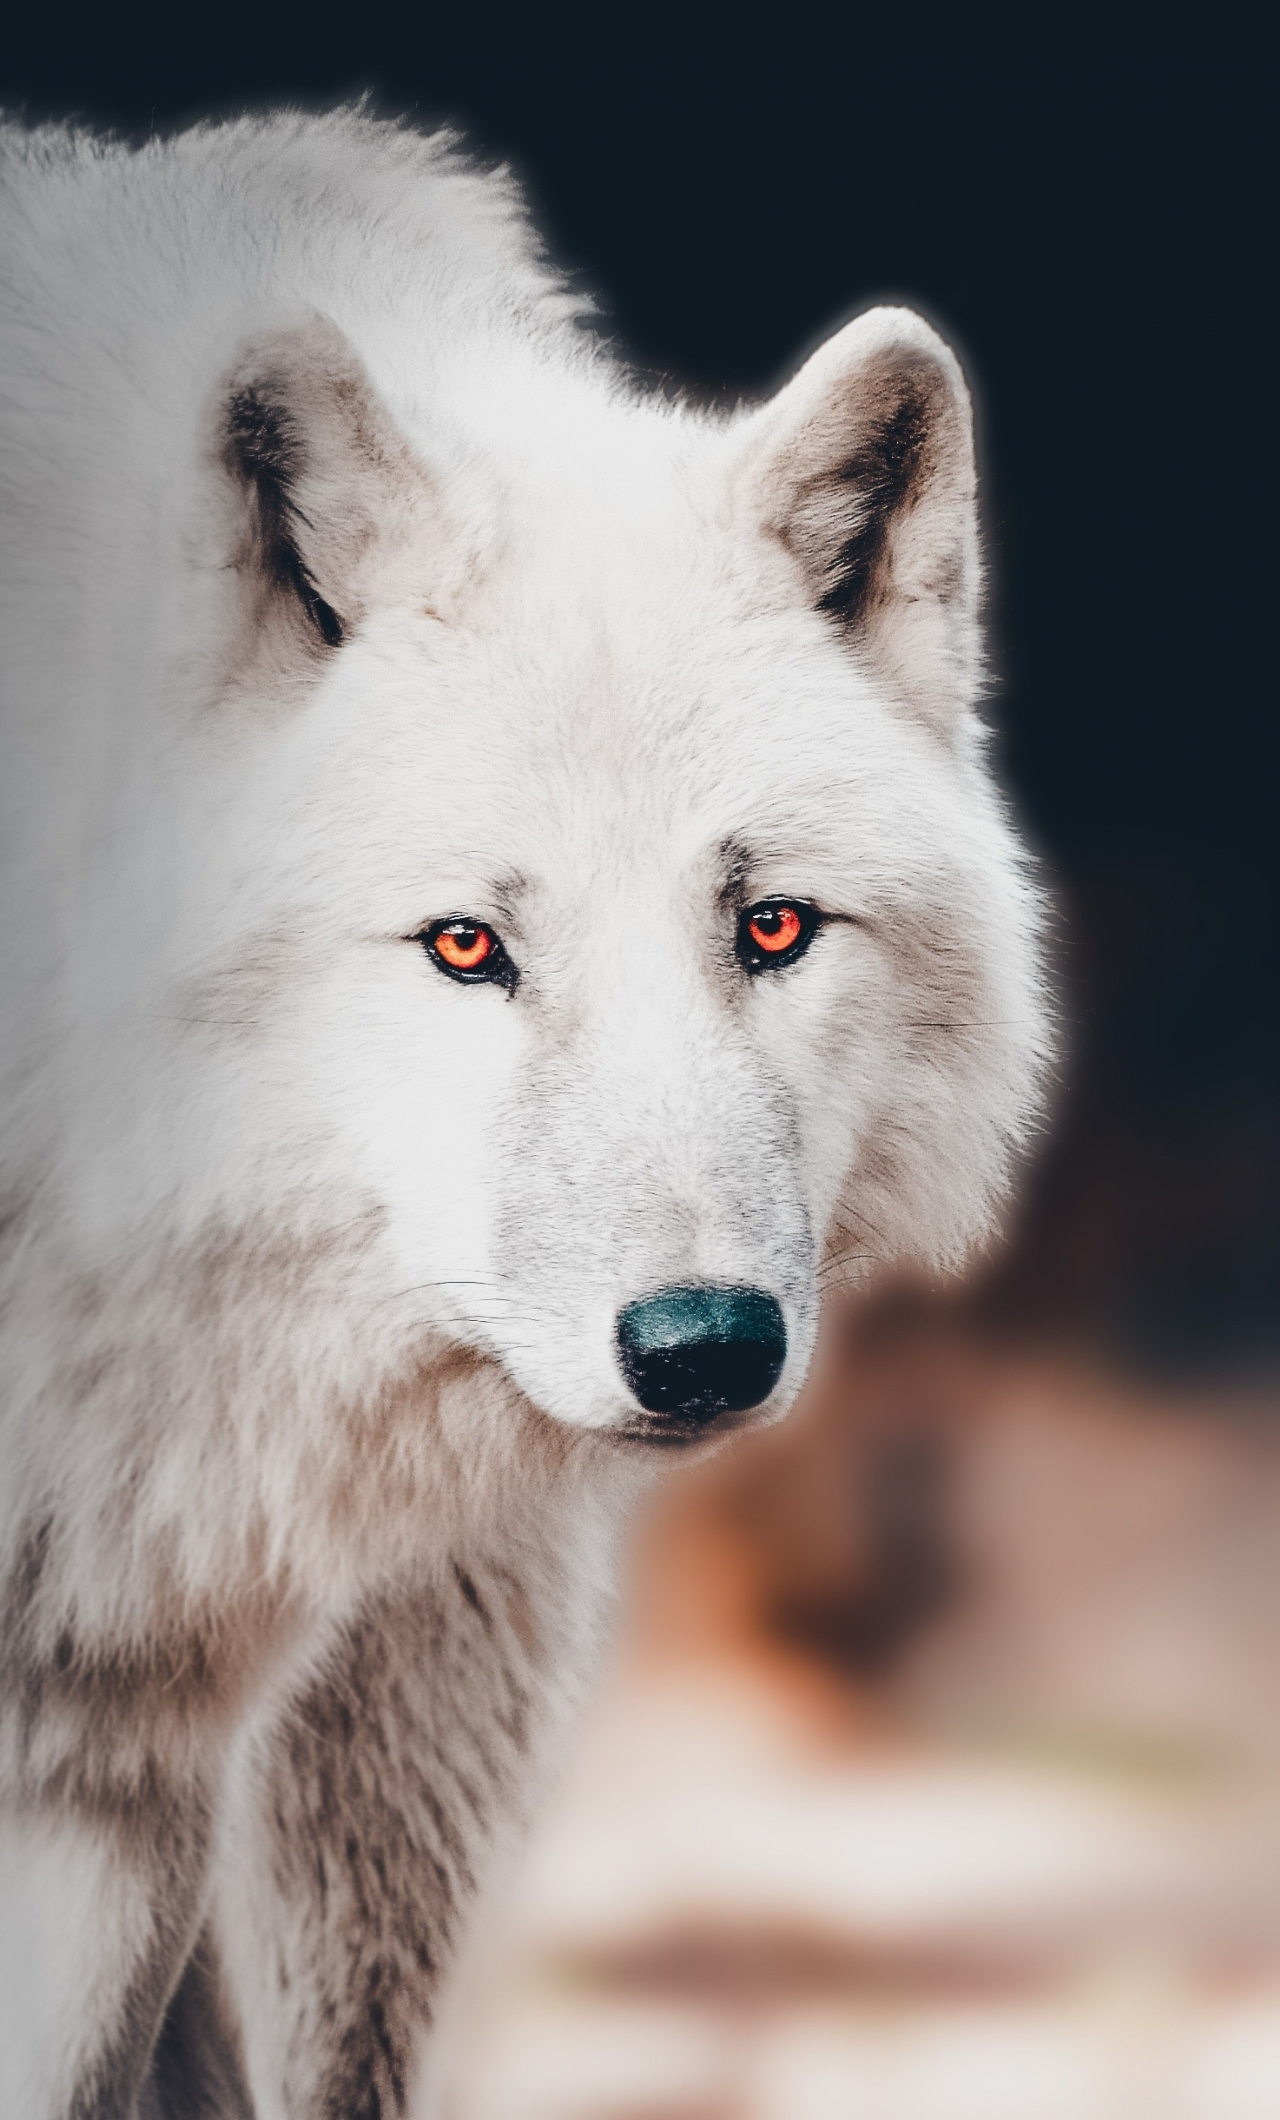 1280x2120 Download the white wolf, portrait wallpaper, iphone 6 plus, hd image, background, 21230